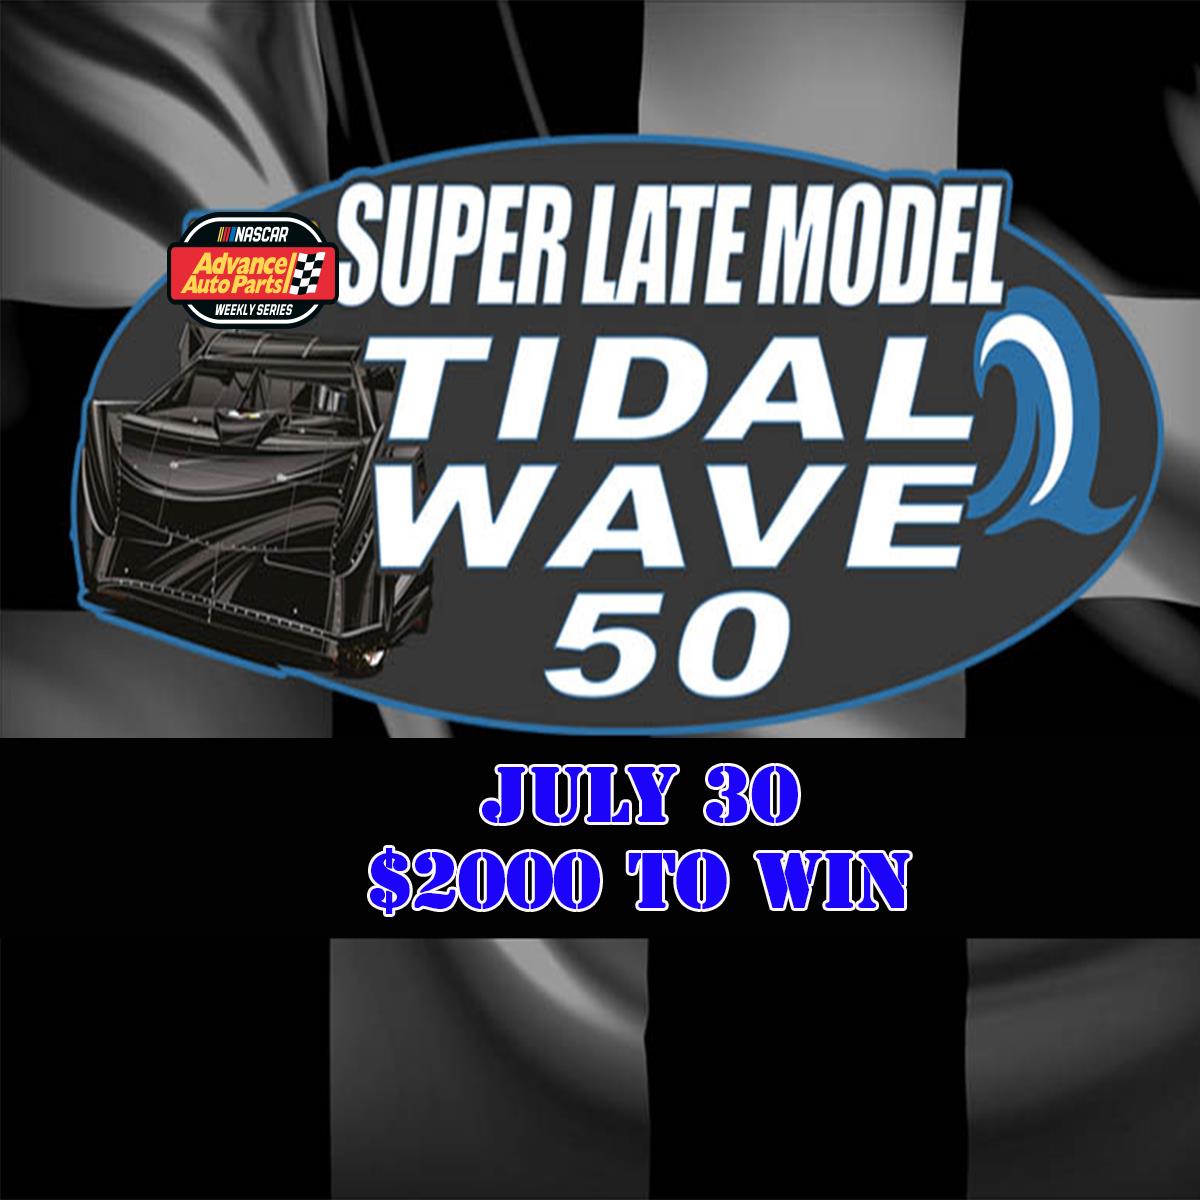 Tidal Wave 50 Up Next $2000 To Win Saturday July 30